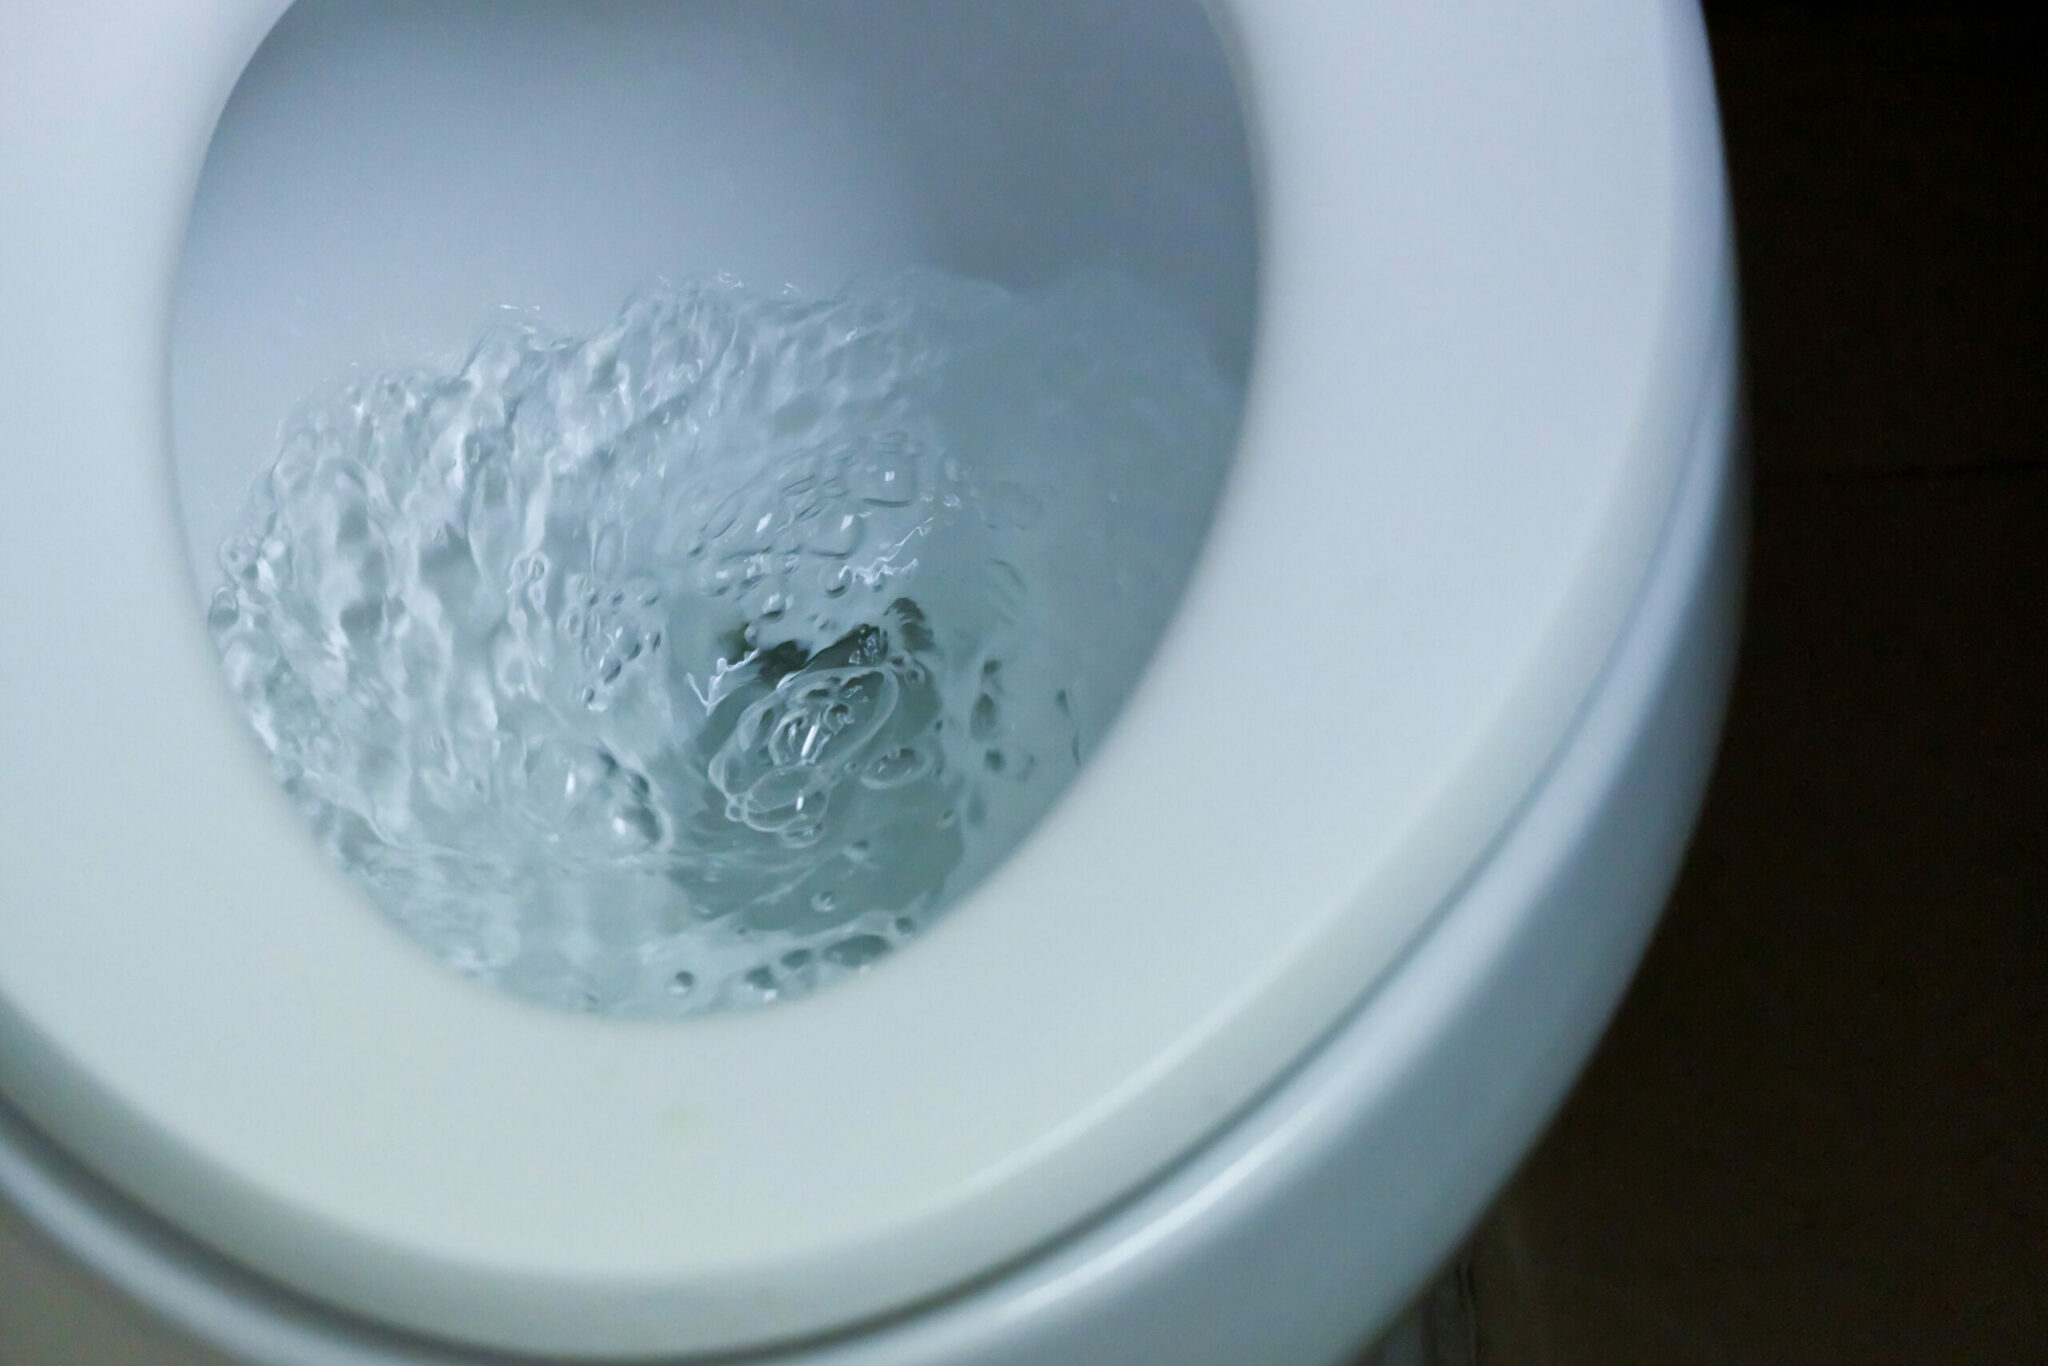 why do toilets flush counterclockwise in the northern hemisphere and clockwise in the southern hemisphere scaled